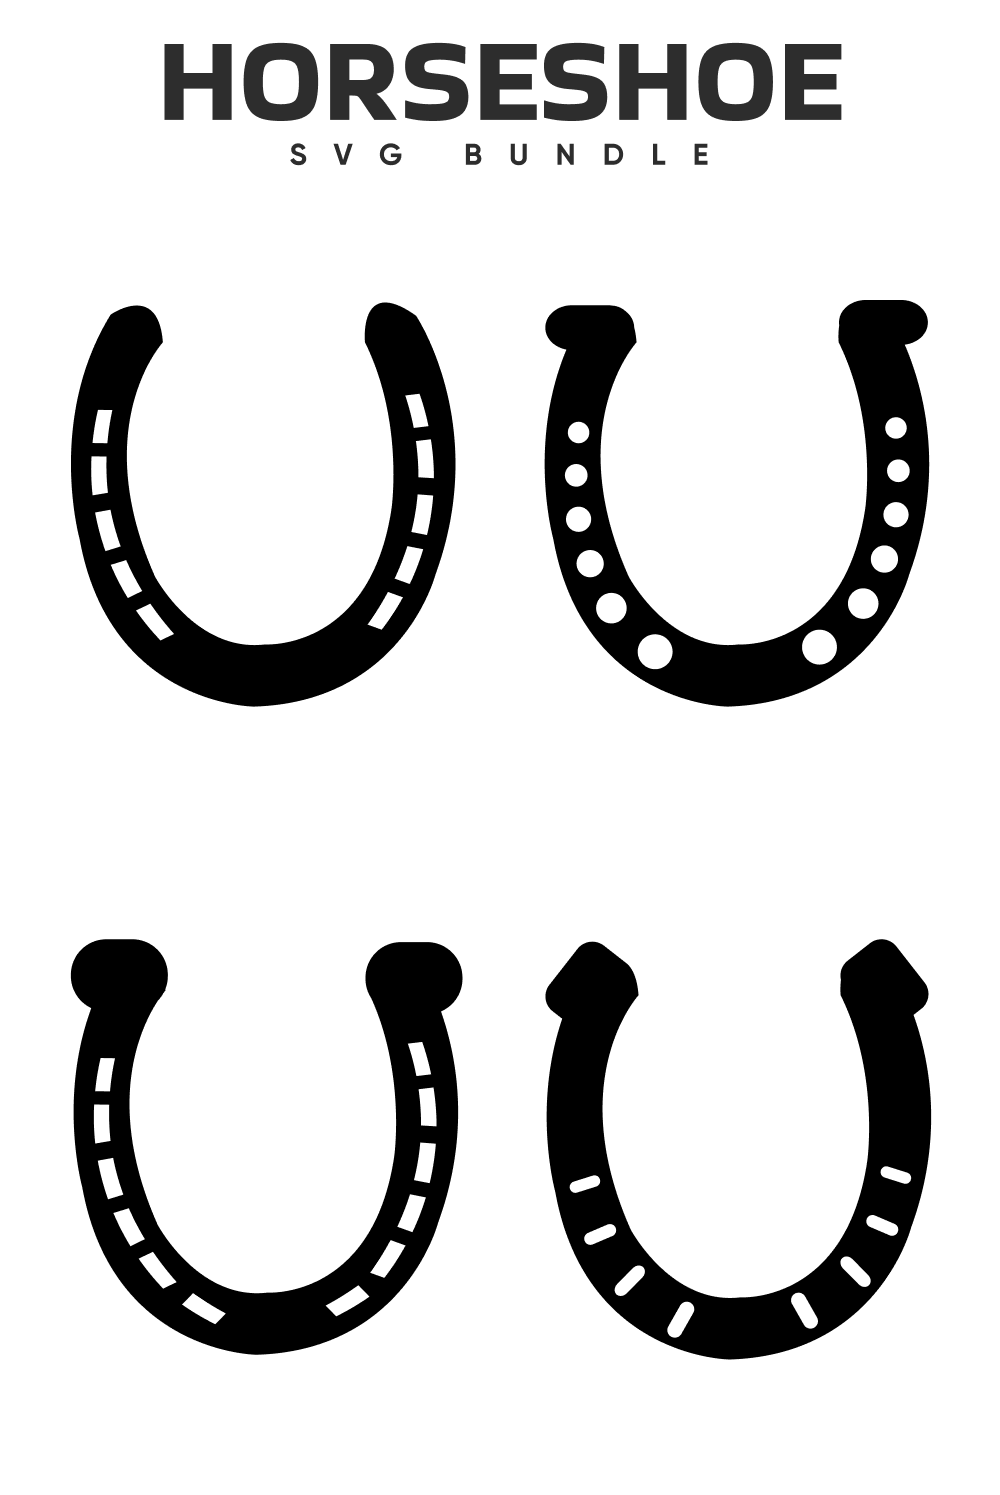 Four different types of horseshoes.